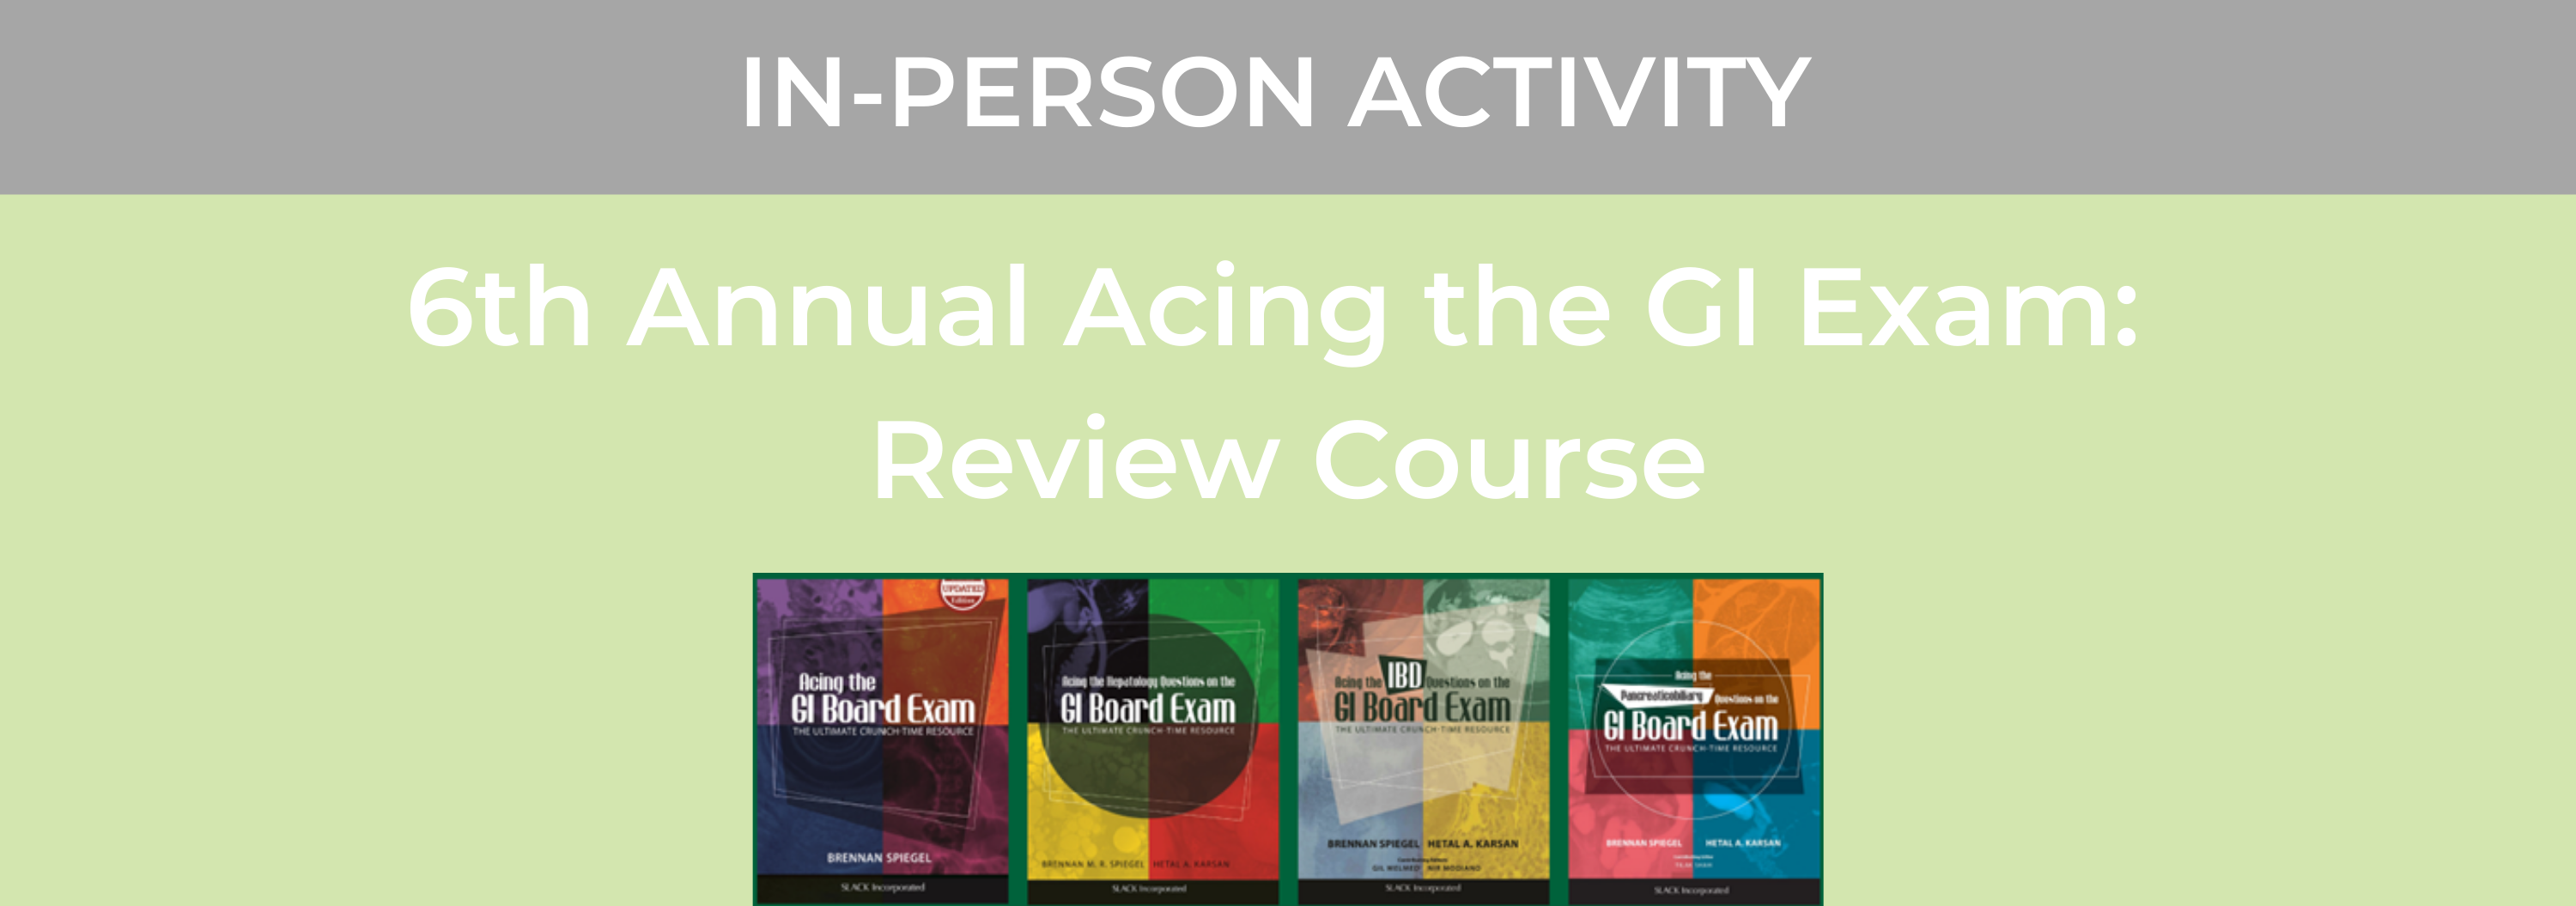 6th Annual Acing the GI Exam: Review Course Banner